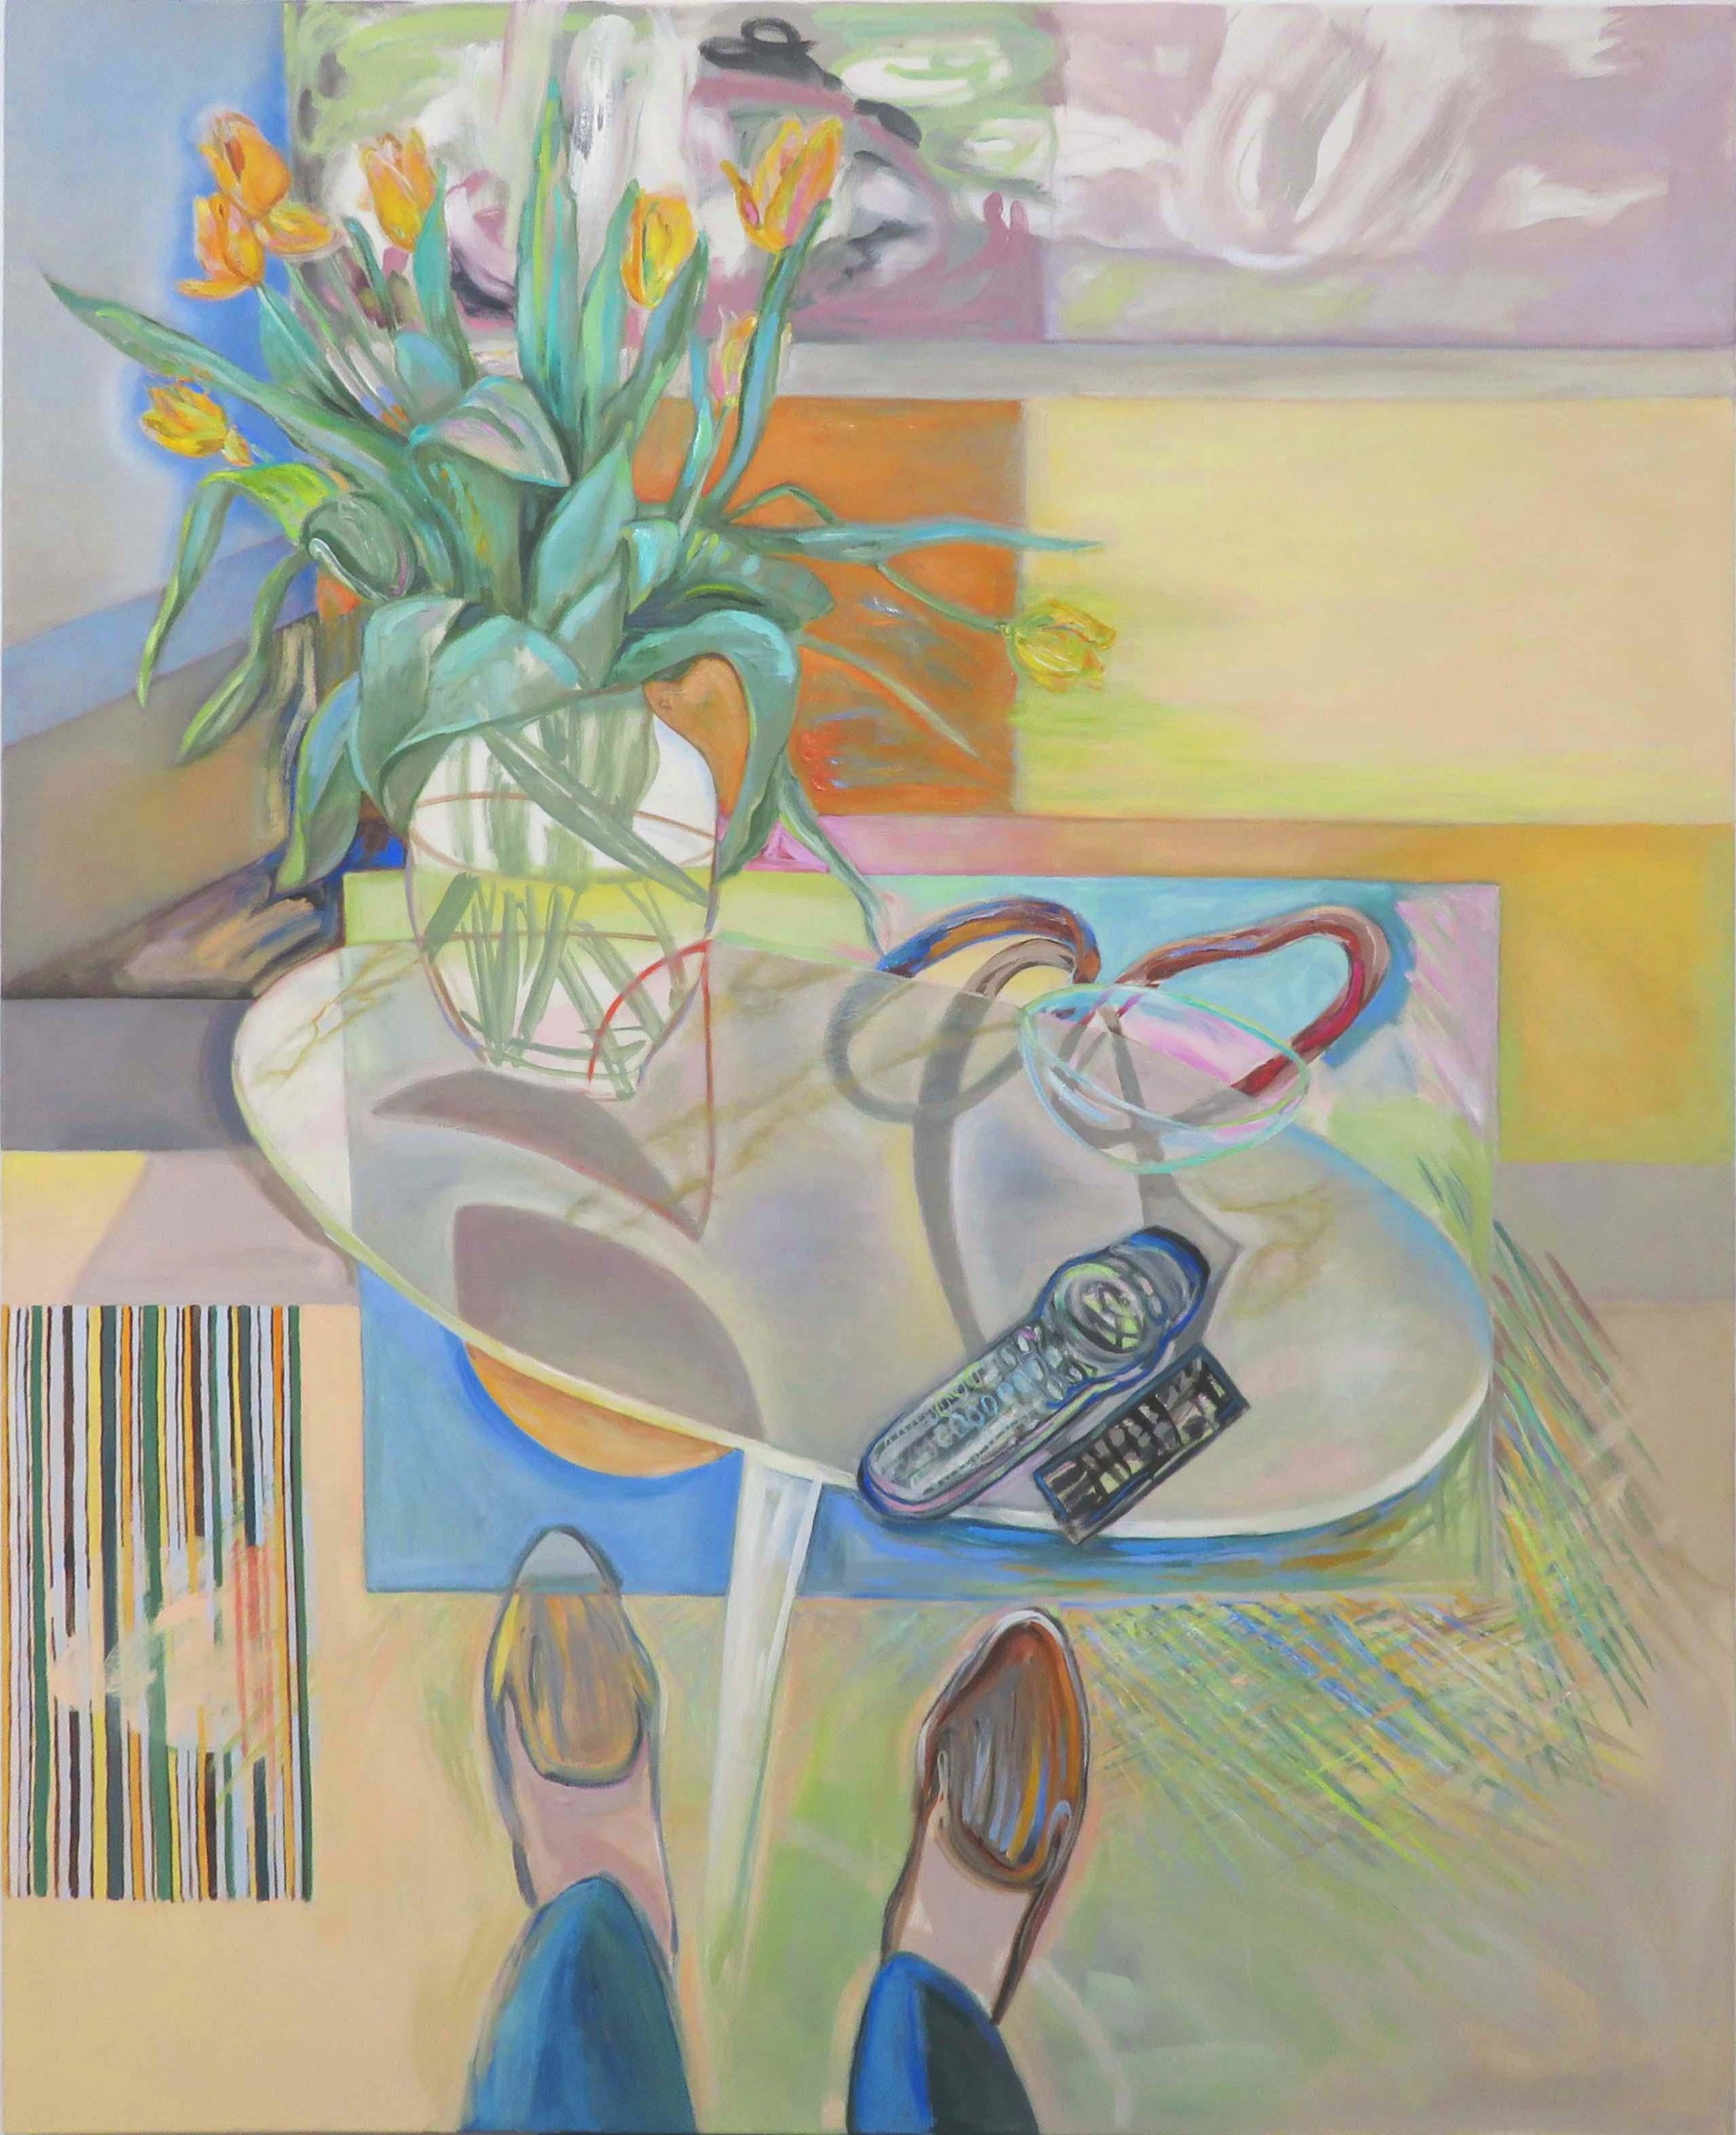 Marilyn Davidson Abstract Painting - "The Diarist's Journal" time travels a still life in yellows, blues, and greens